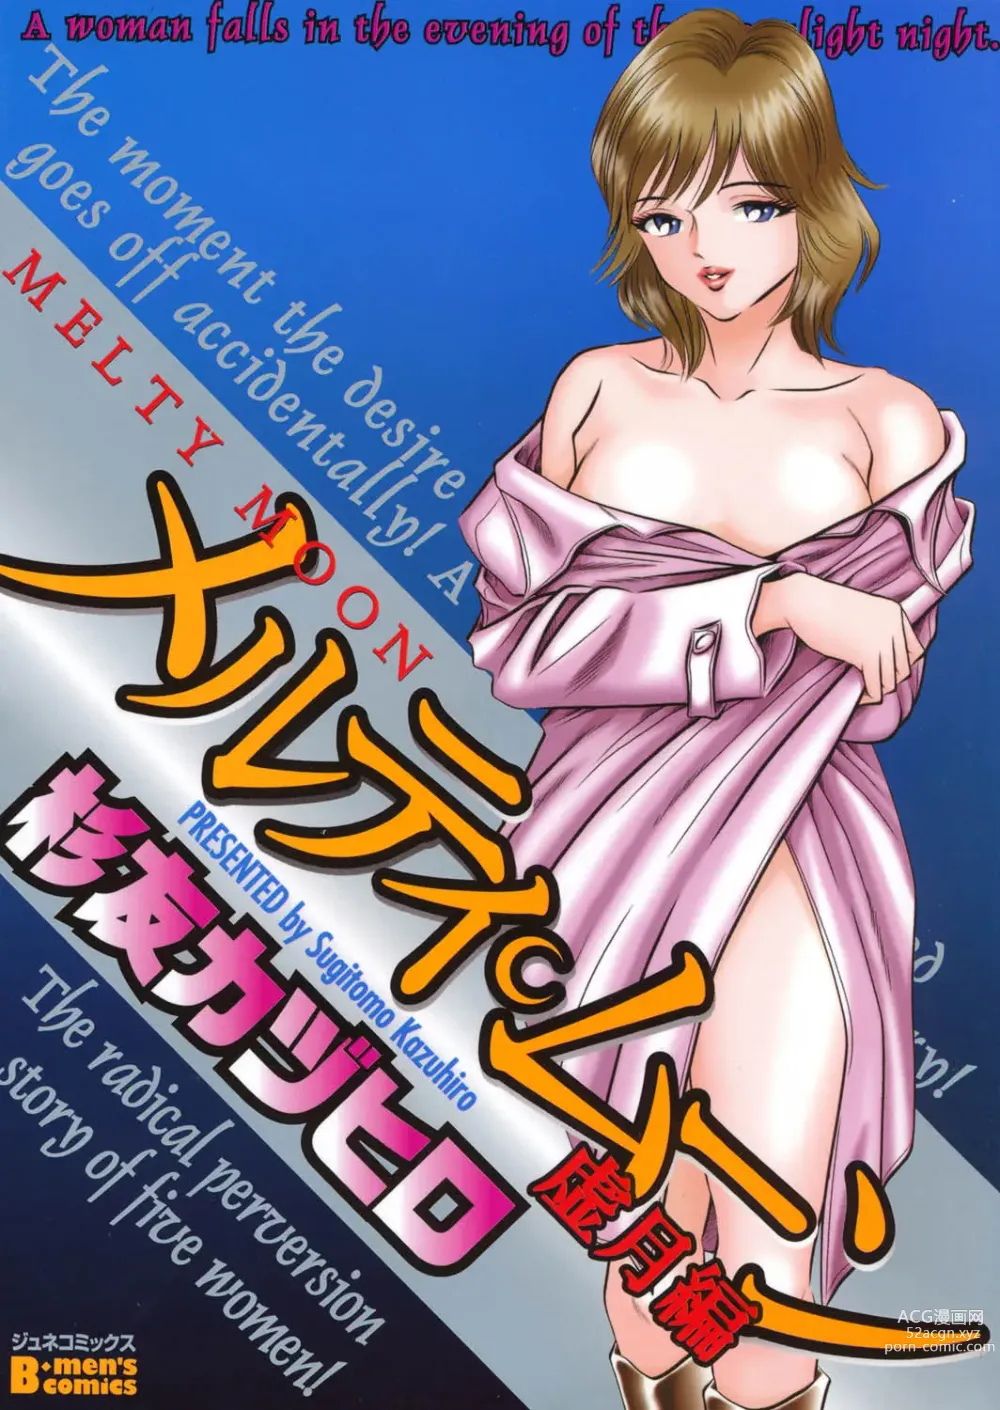 Page 1 of manga Melty Moon Kogetsu Hen - A woman falls in the evening of the moonlight night.